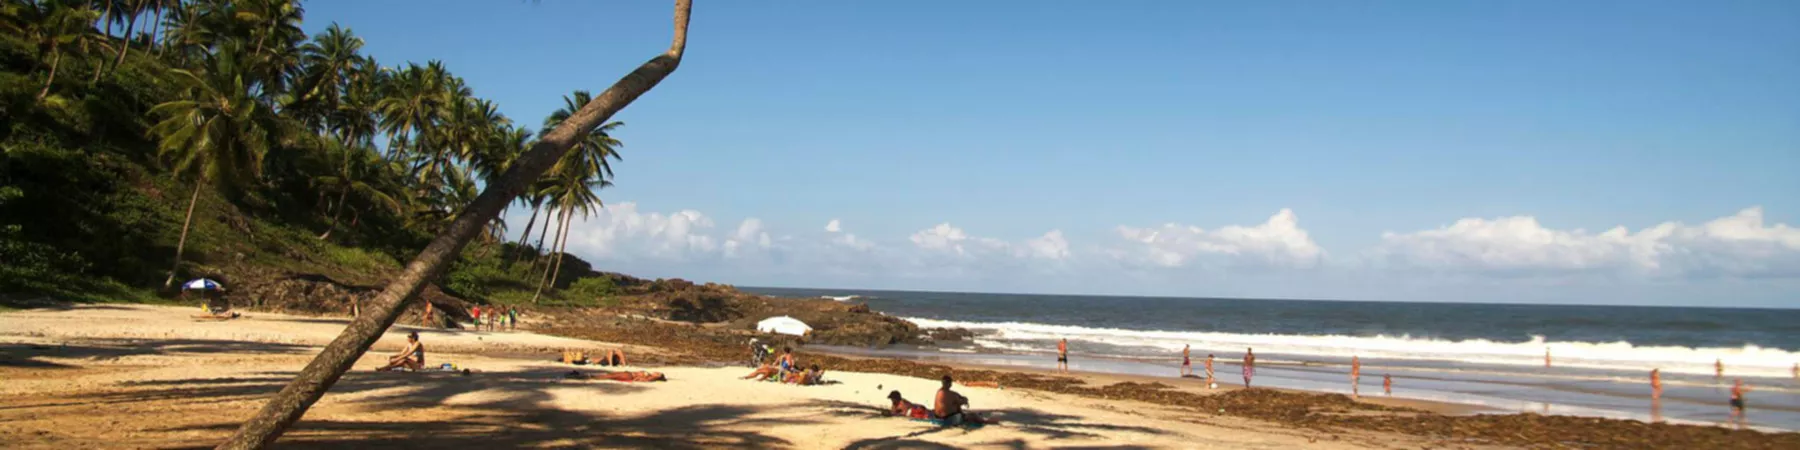 Jeribucacu Beach in Brazil, South America | Surfing,Beaches - Rated 4.1